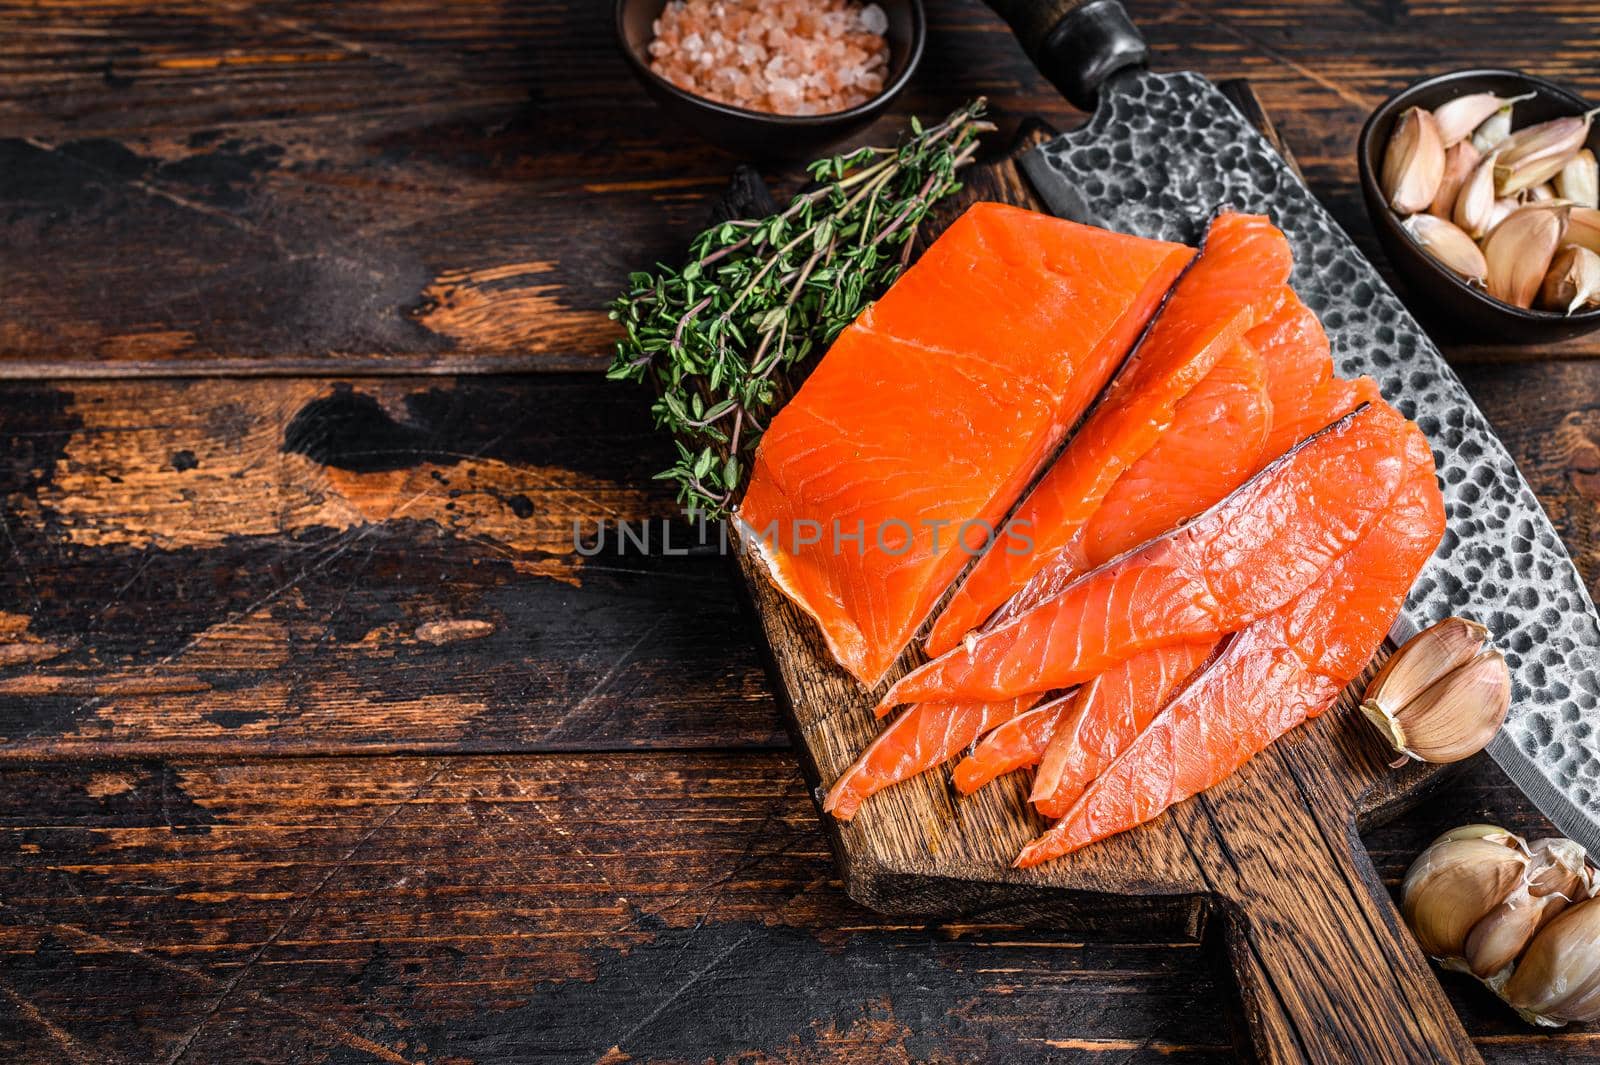 Sliced Smoked salmon fillet on a wooden cutting board with herbs. Dark wooden background. Top view. Copy space by Composter